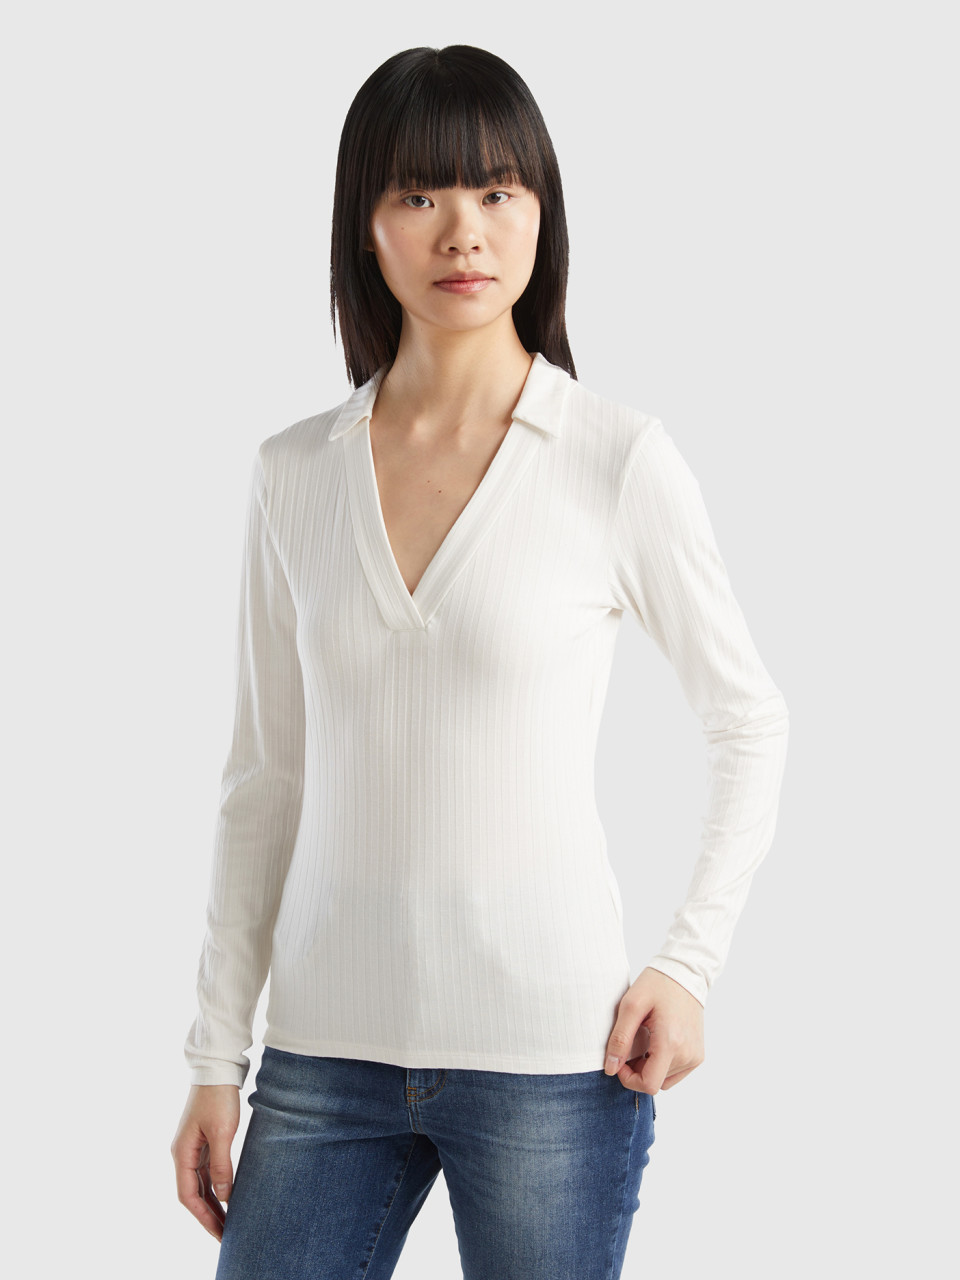 Benetton, Ribbed T-shirt With Collar, Creamy White, Women